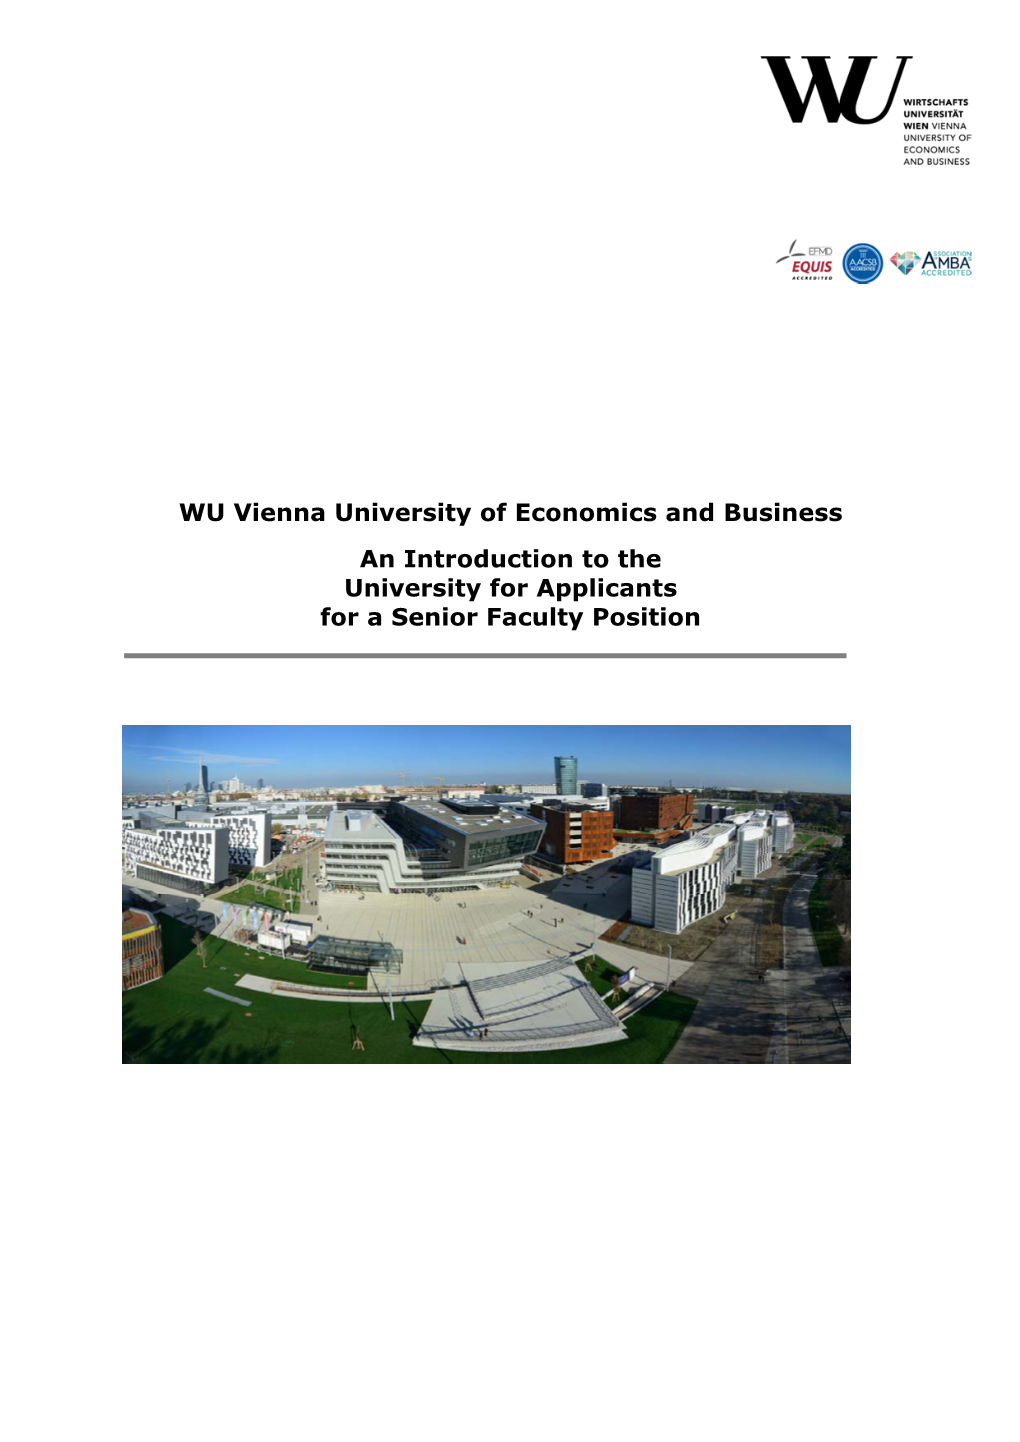 WU Vienna University of Economics and Business an Introduction to the University for Applicants for a Senior Faculty Position